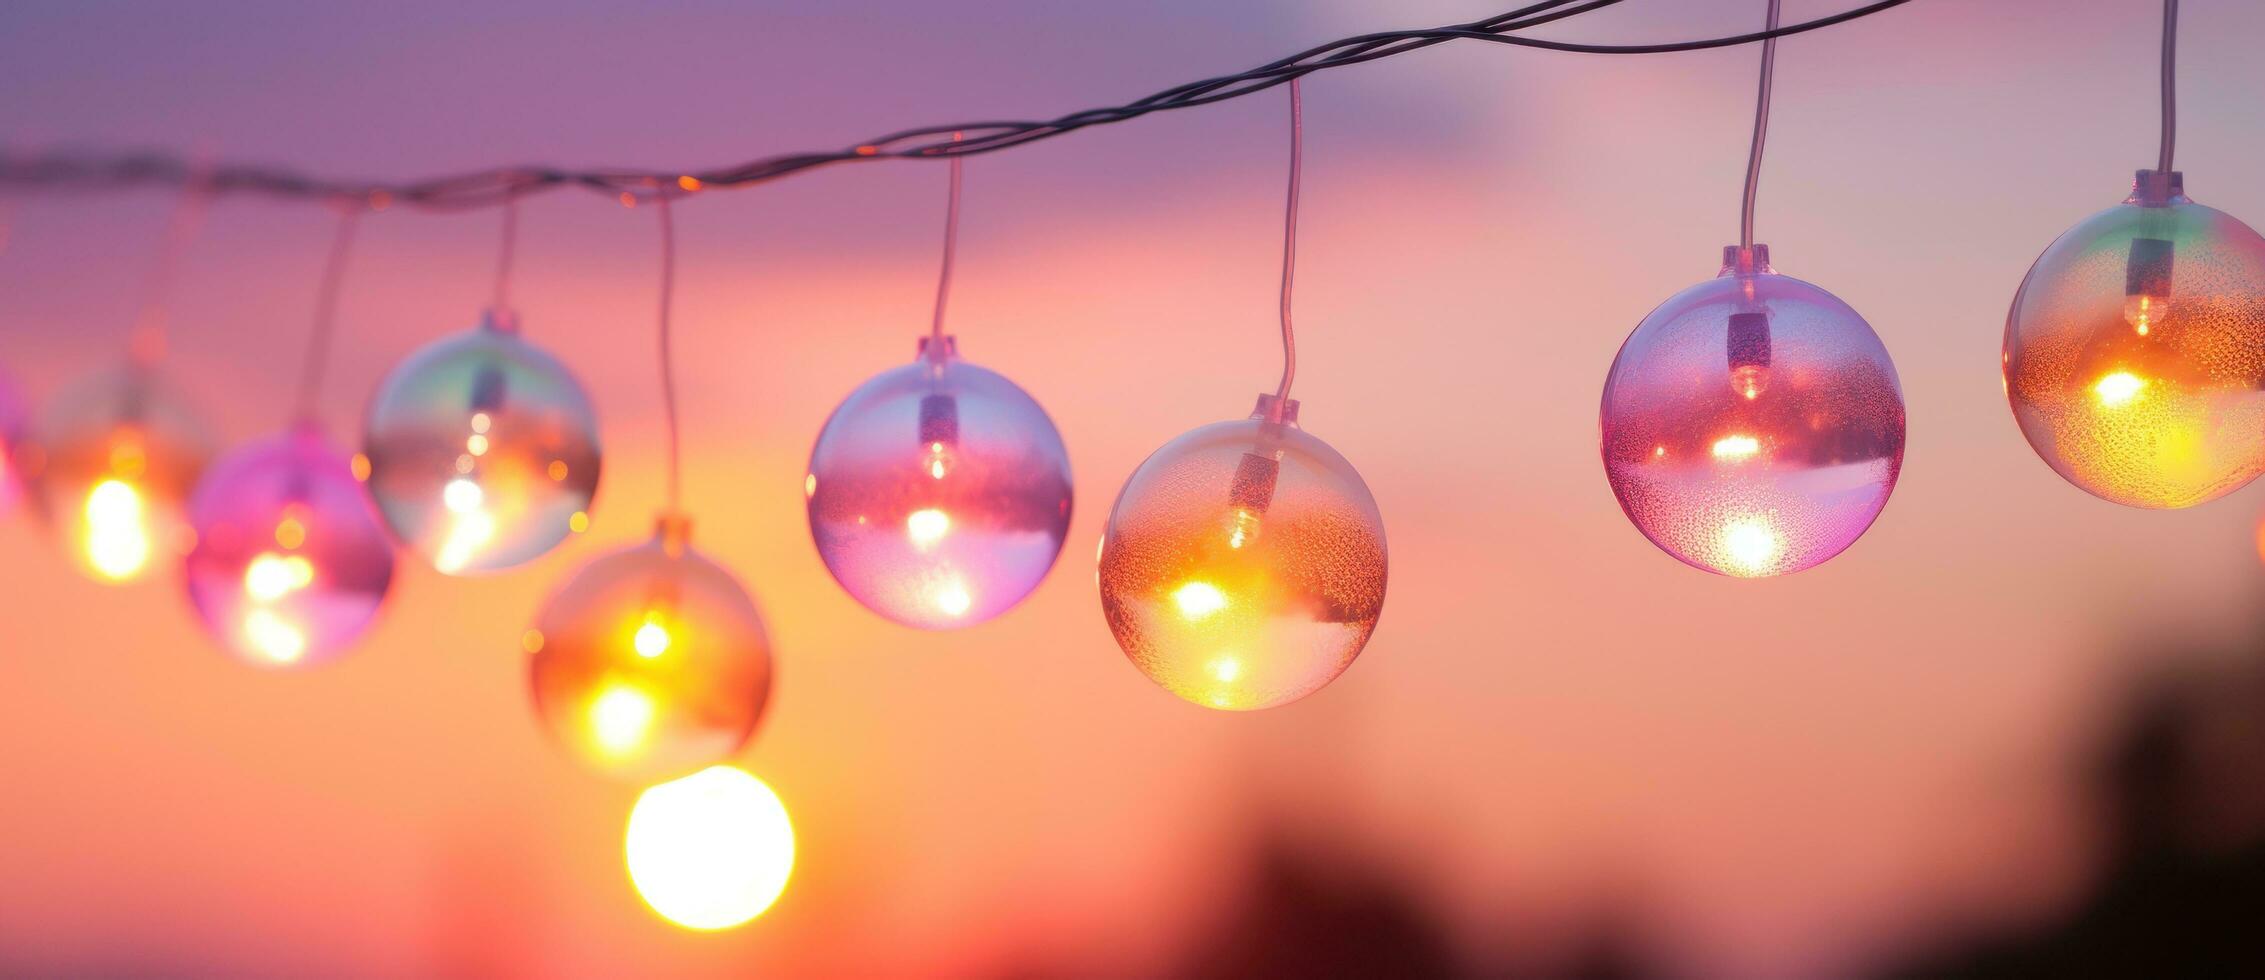 String lights transparent, image and background for free download - Fairy lights